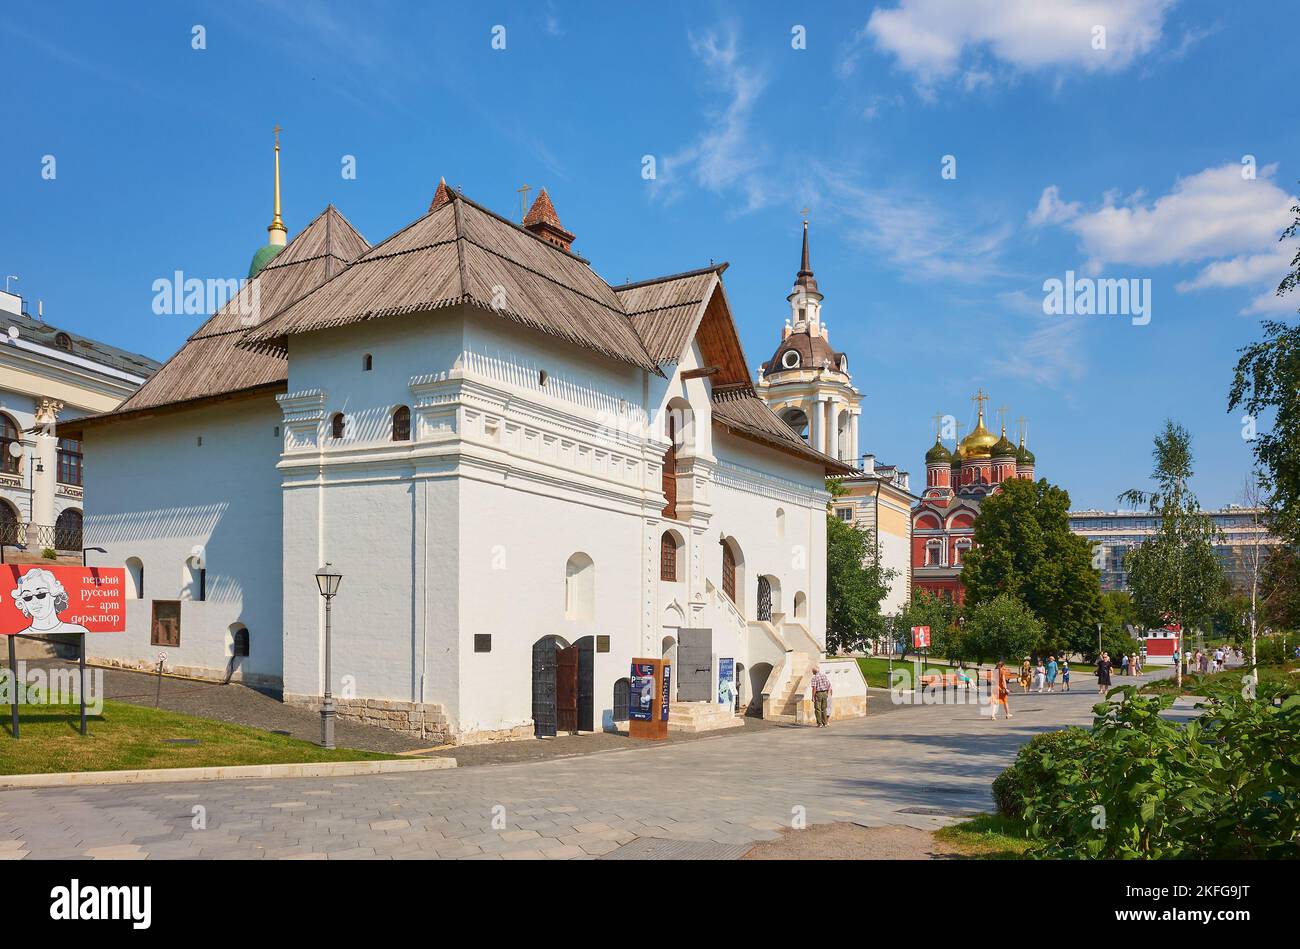 Ancient chambers of the Old English Court in Zaryadye Park on Varvarka Street, early 16th century, architectural monument, cityscape: Moscow, Russia - Stock Photo